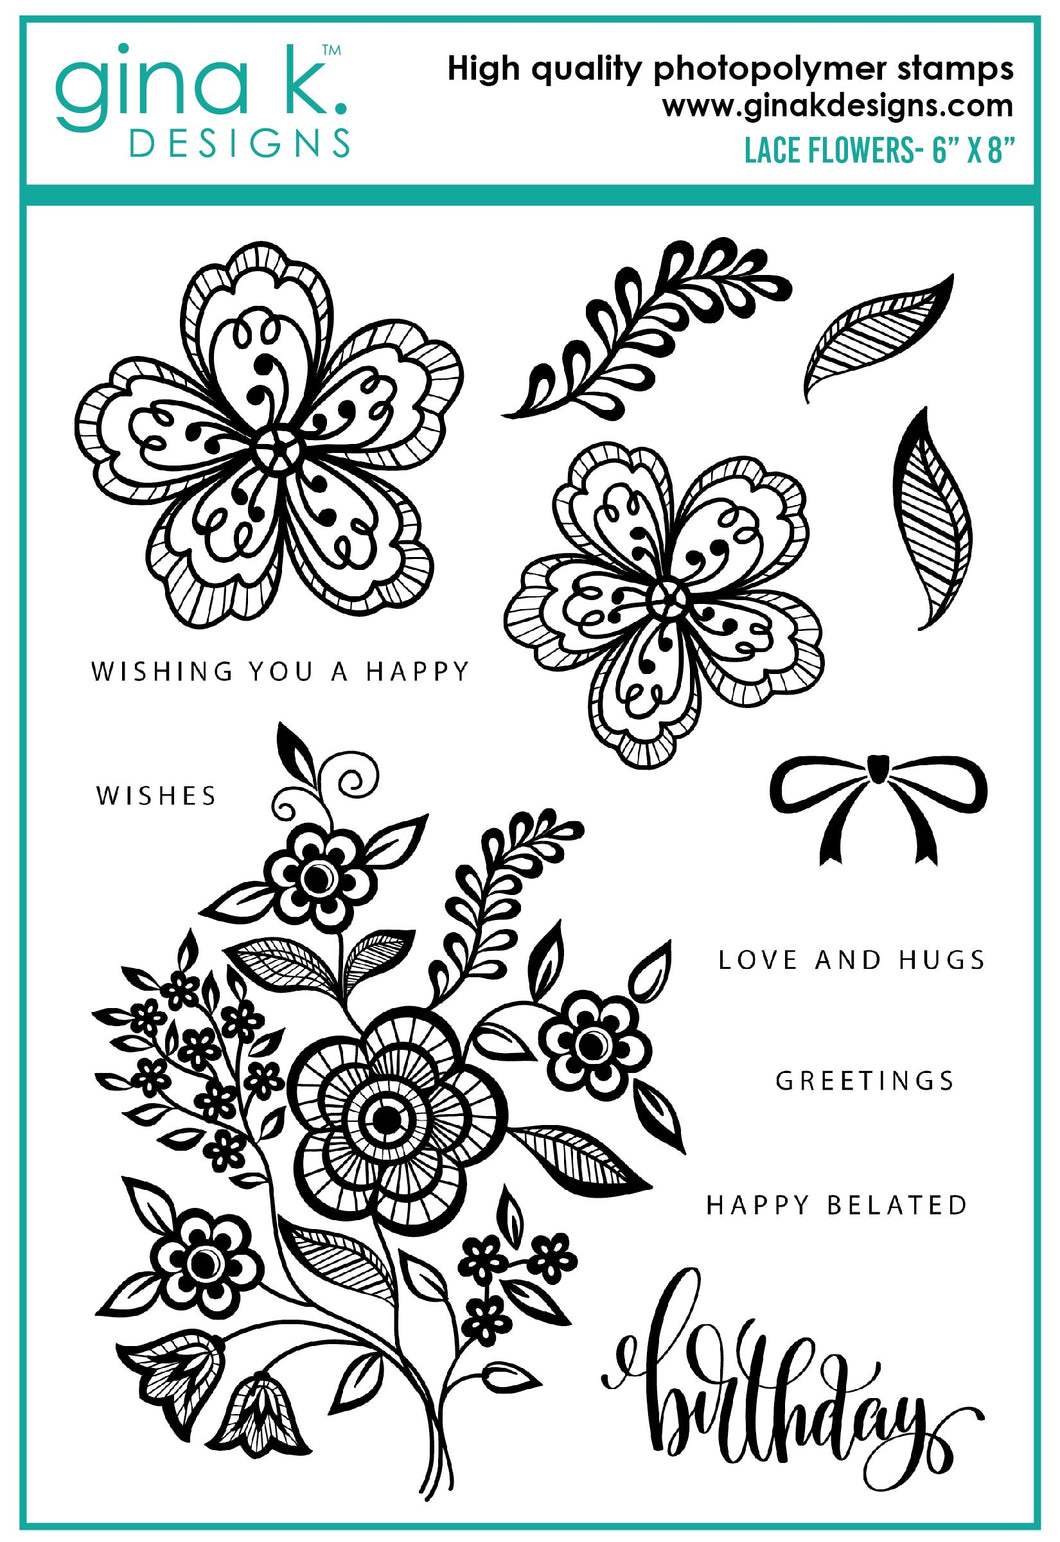 Gina K. Designs - Stamps - Lace Flowers. Lace Flowers is a stamp set by Gina K Designs. This set is made of premium clear photopolymer and measures 6